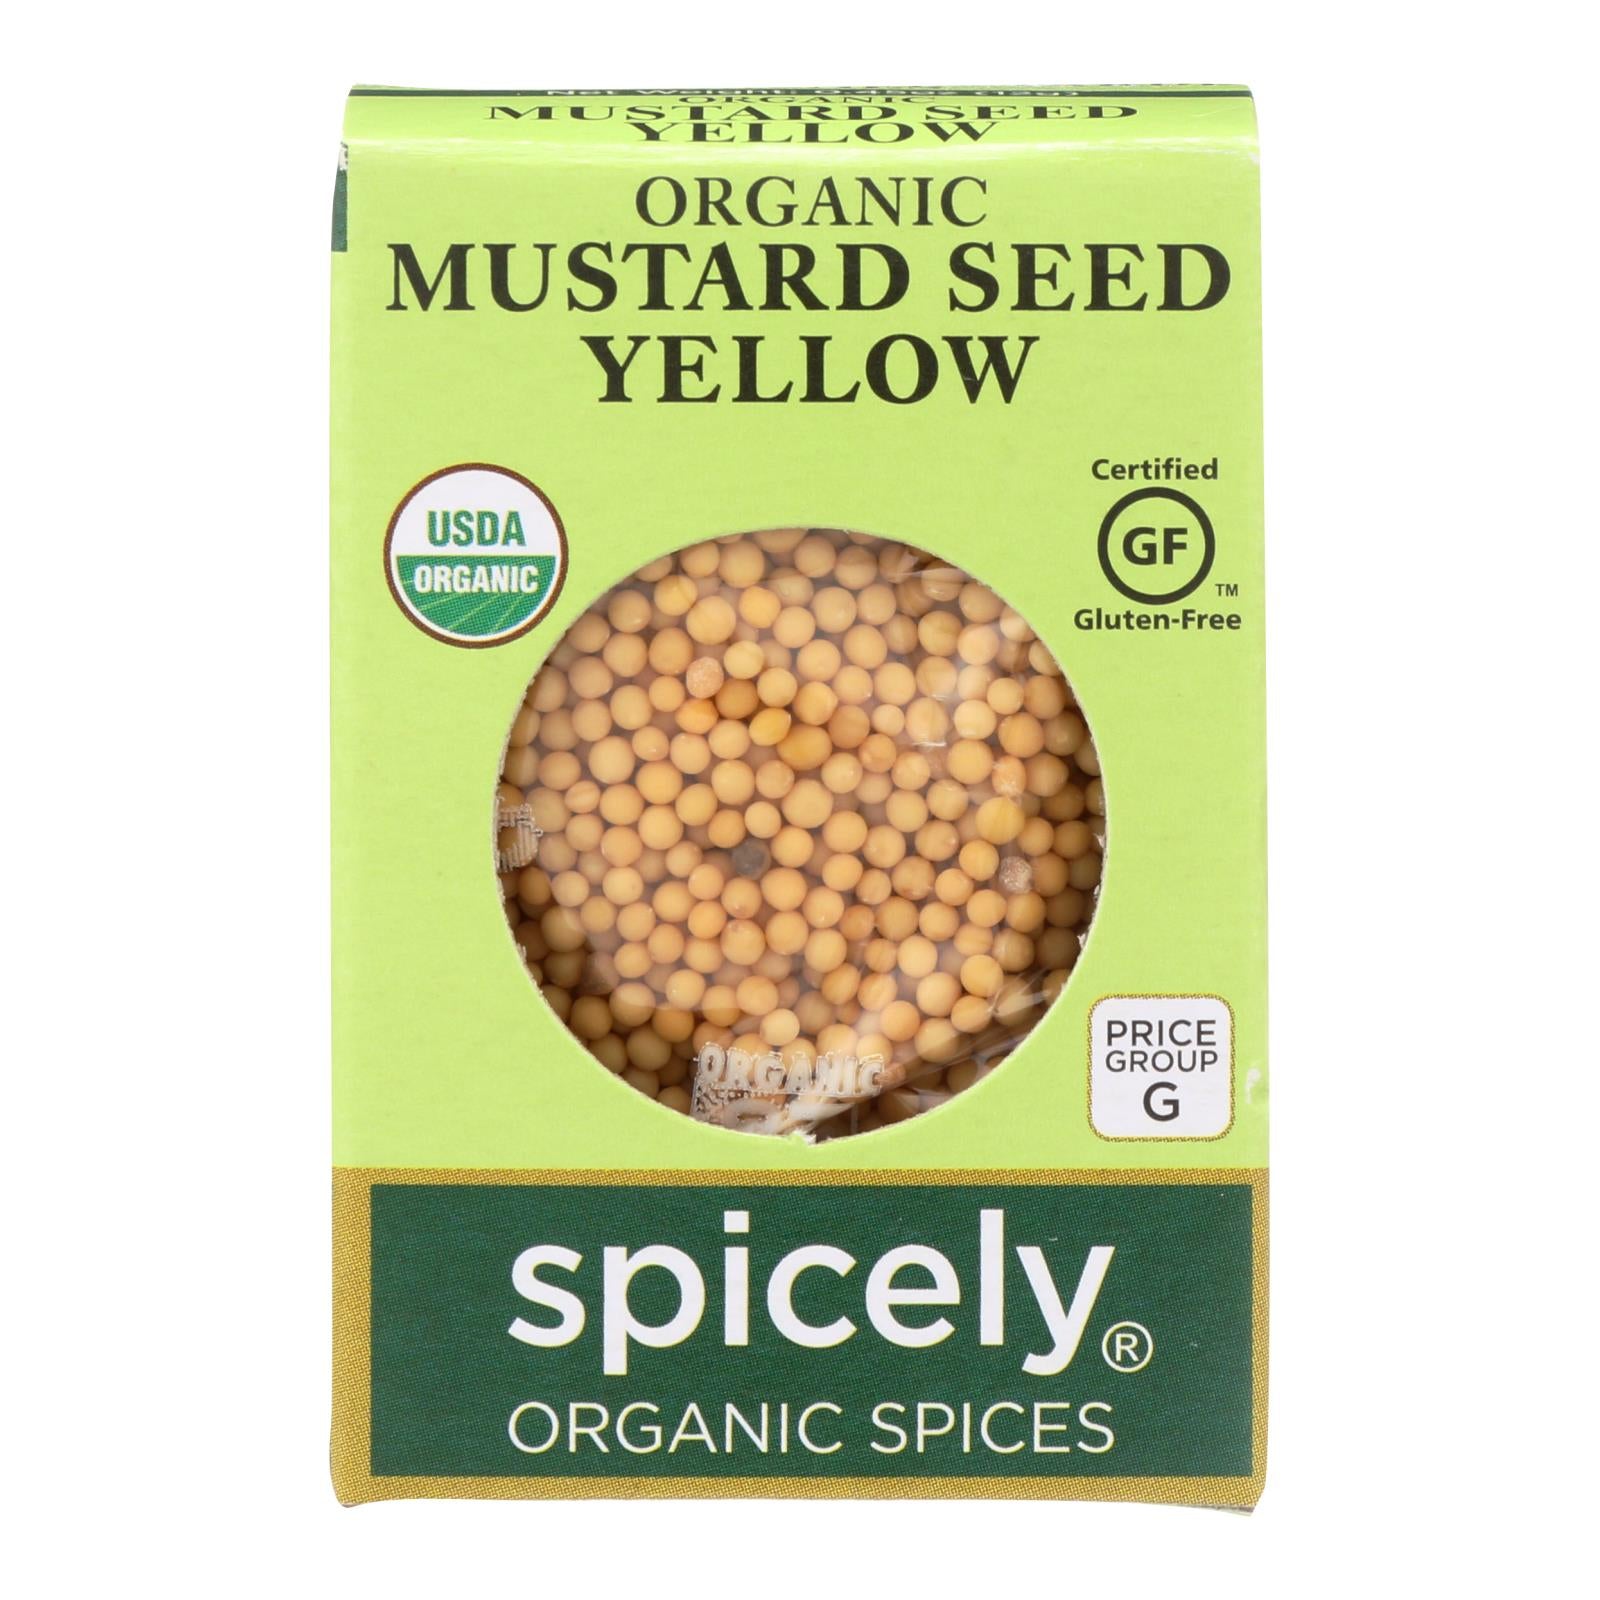 Spicely Organics - Organic Mustard Seed - Yellow - Case Of 6 - 0.45 Oz. - Whole Green Foods